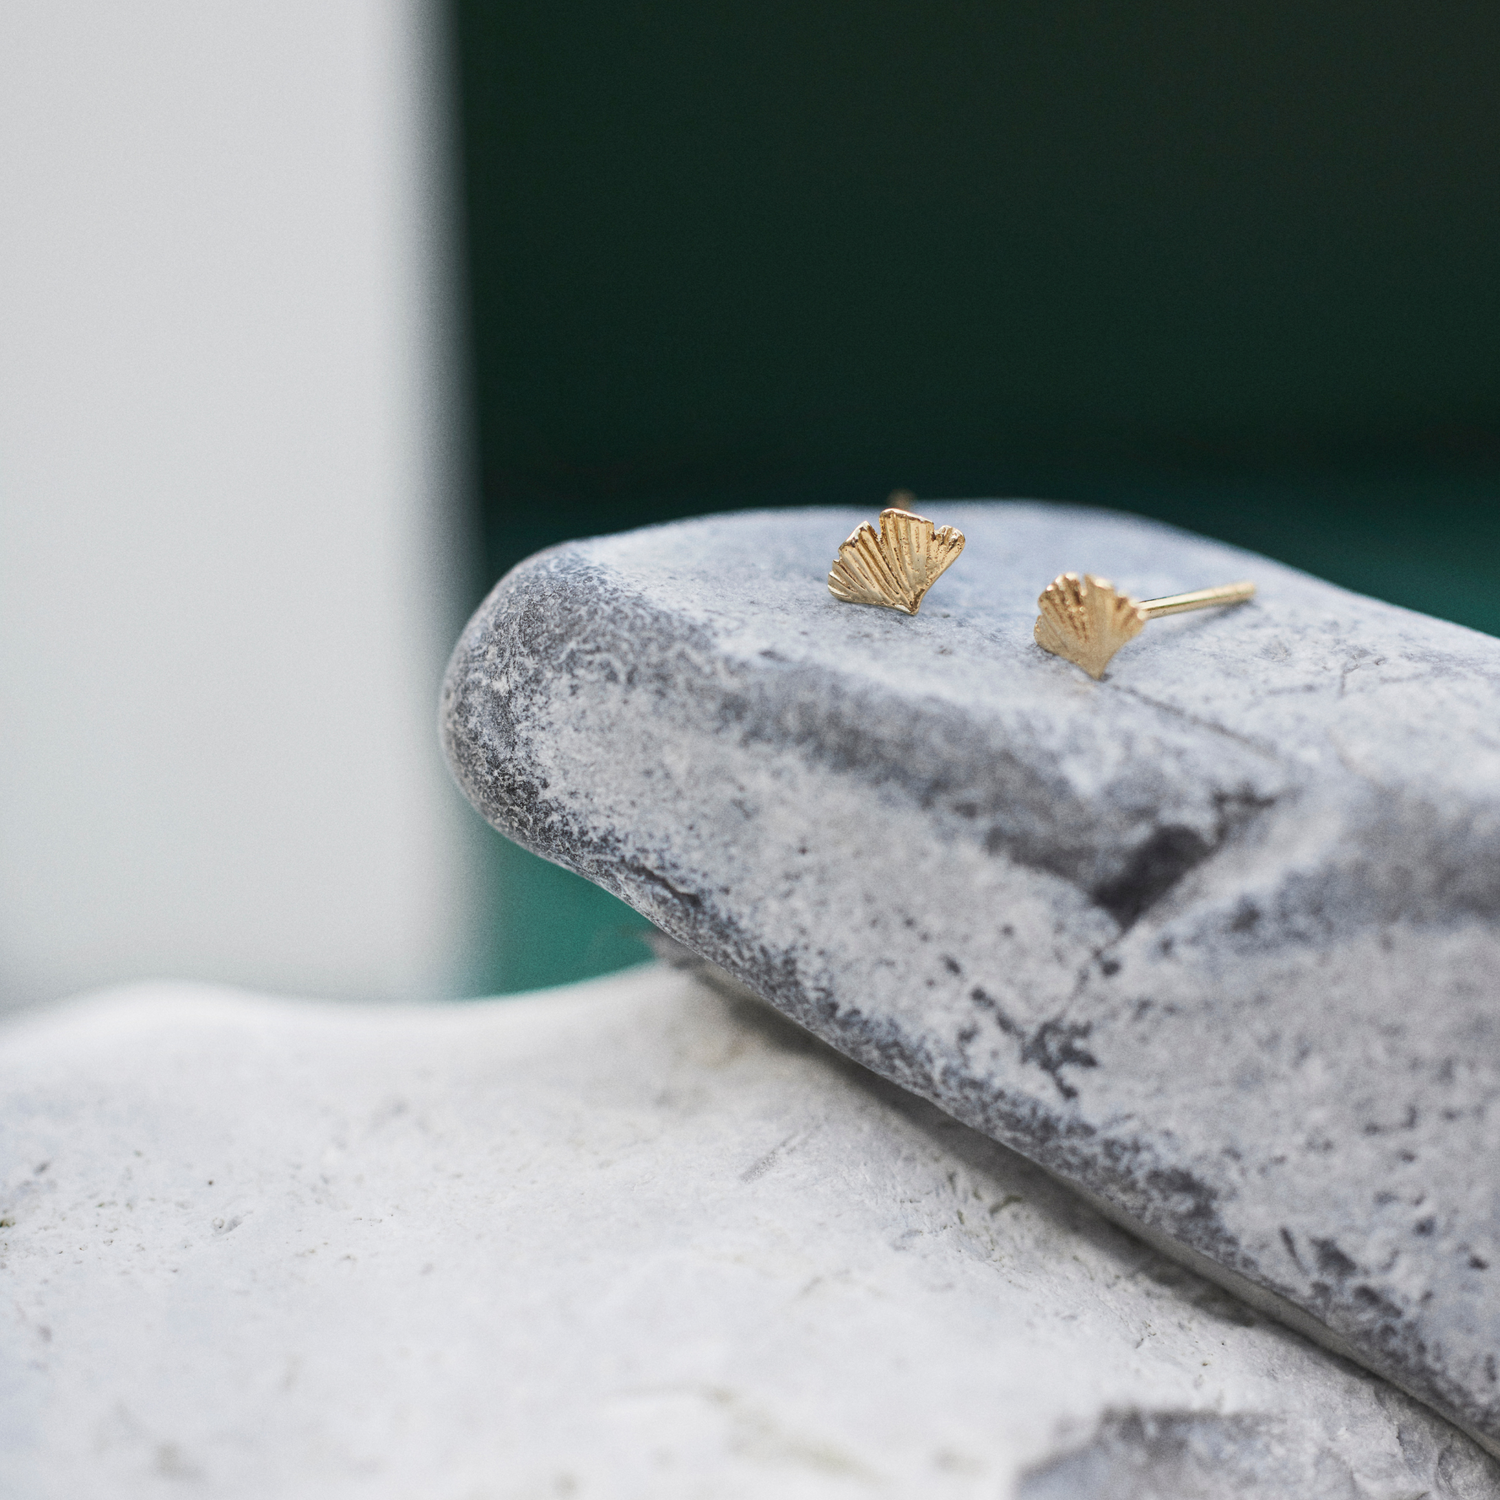 beautiful exclusive gold stud earrings in 18 karat recycled gold shaped as small Ginkgo Biloba leaves places elegantly on a few stacked rocks.